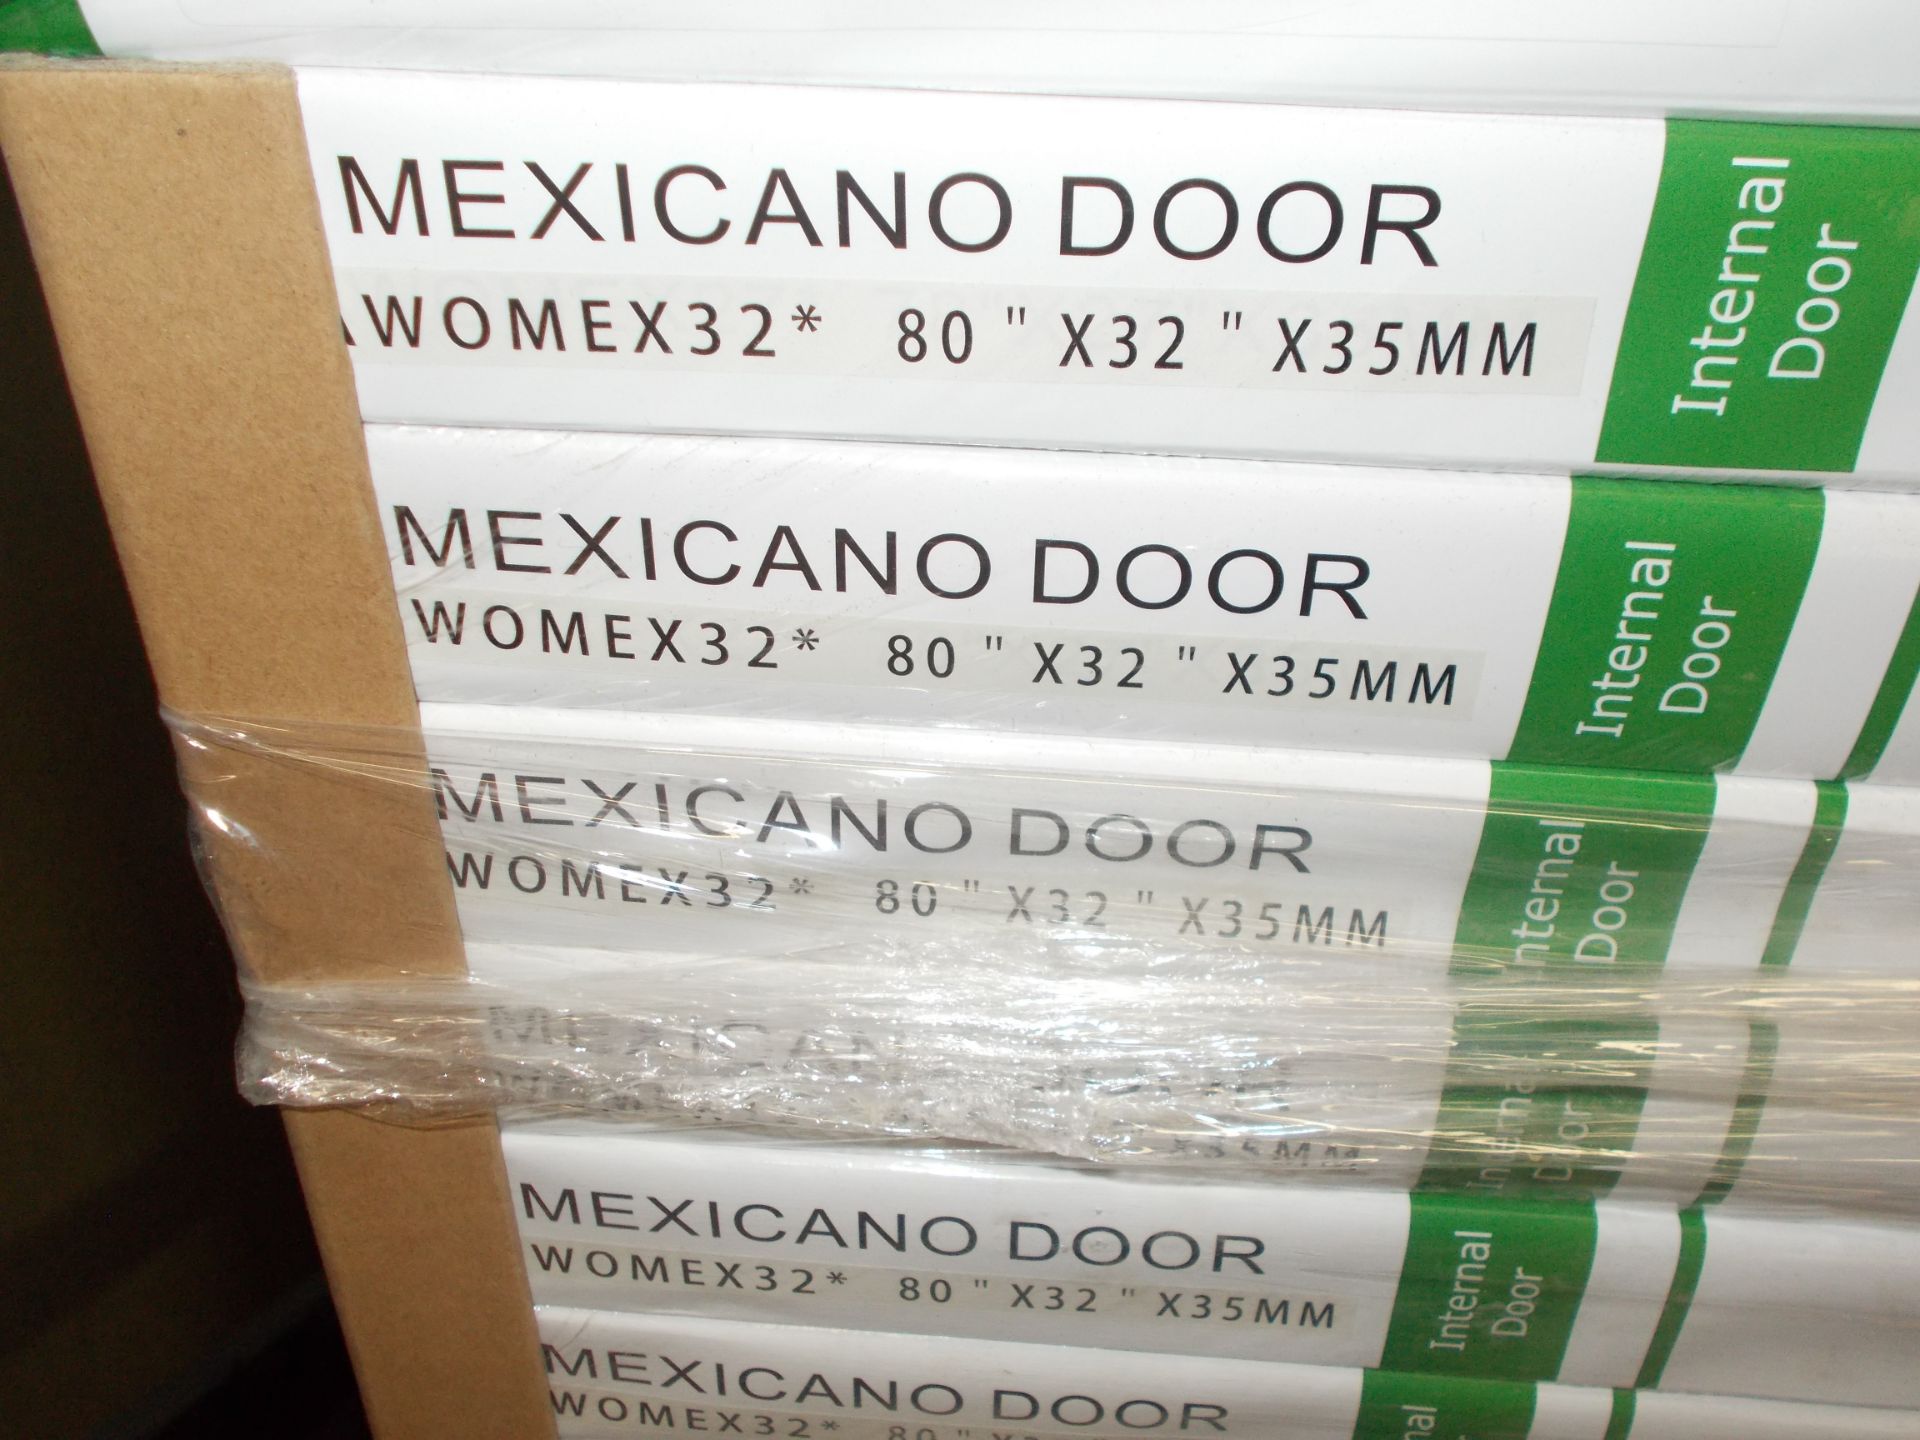 7 x White Oak Mexicano Door AWOMEX32 80”x32”x35mm - Lots to be handed out in order they are stacked, - Image 3 of 3